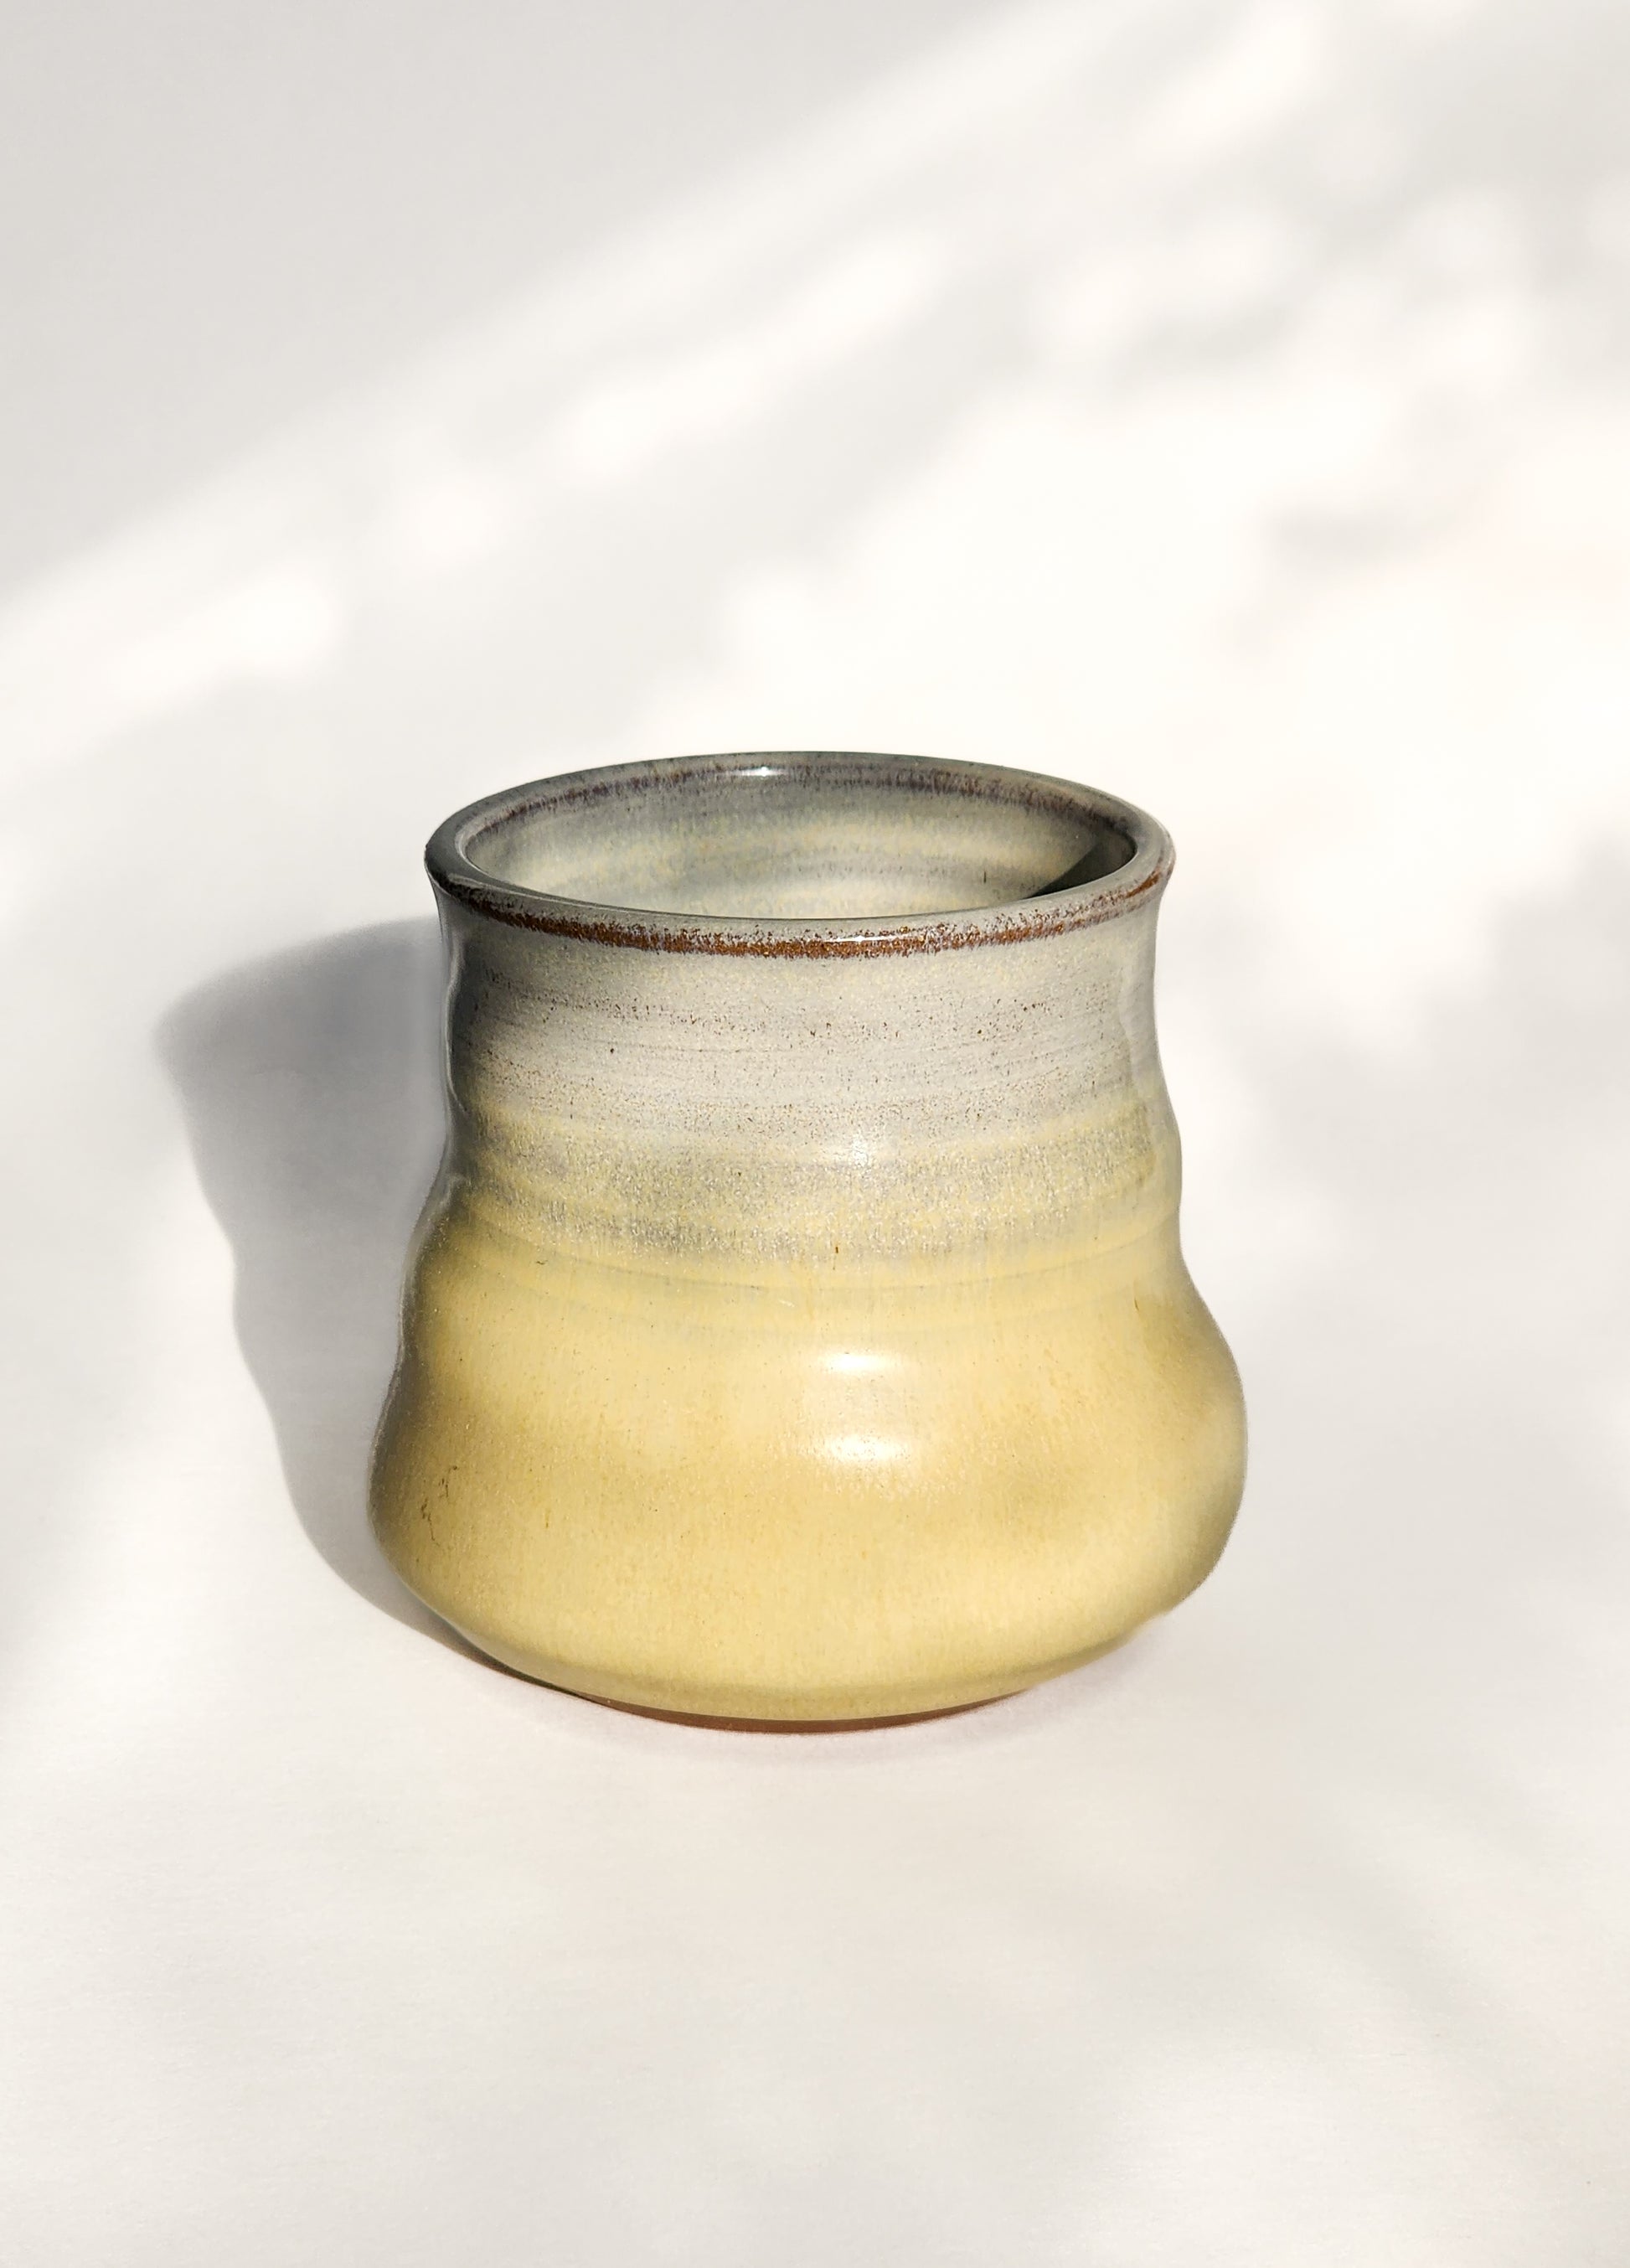 Image: Clinton Pottery's 8 oz Small Tumbler in Butter Yellow – A visually appealing addition with a cool, curvy design for a comfortable grip. This machine washable tumbler, crafted with care, adds contemporary elegance. The gentle Butter Yellow color brings warmth, reminiscent of golden fields and cozy kitchens.